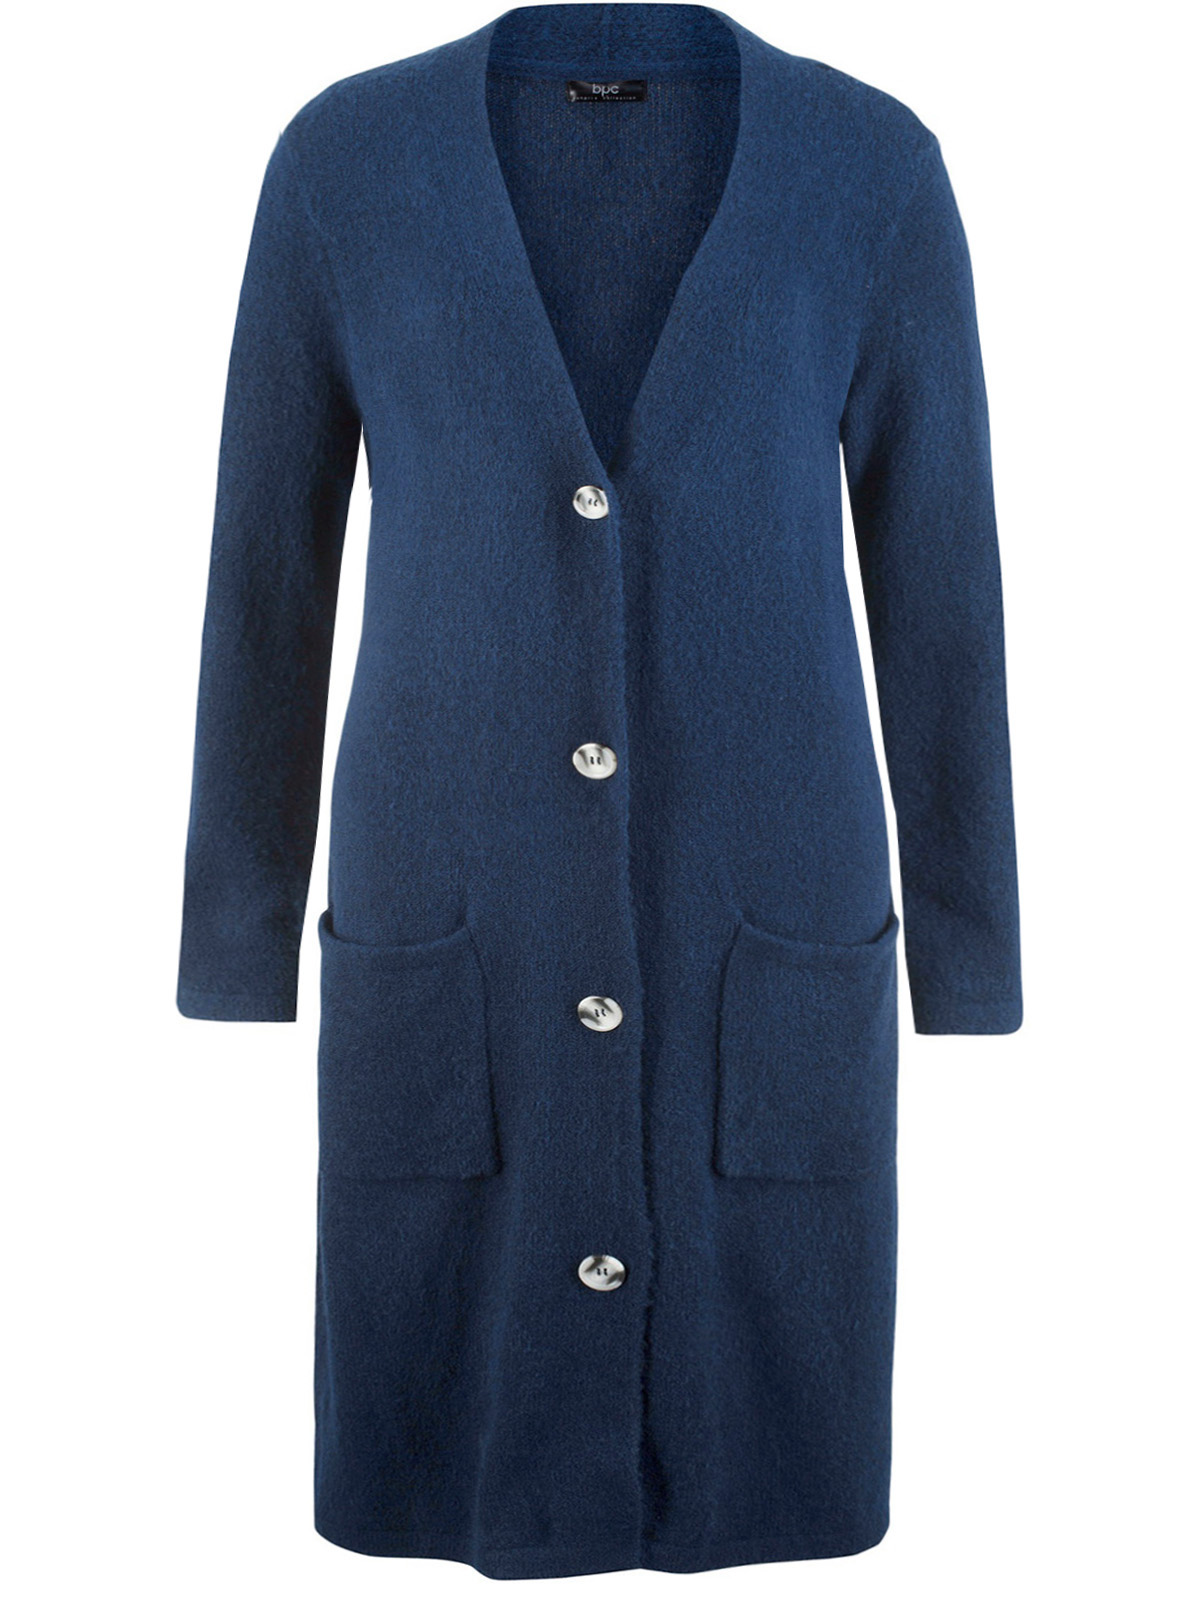 BPC - - BPC NAVY Super Soft Long Knitted Cardigan - Size 10/12 to 30/32 ...